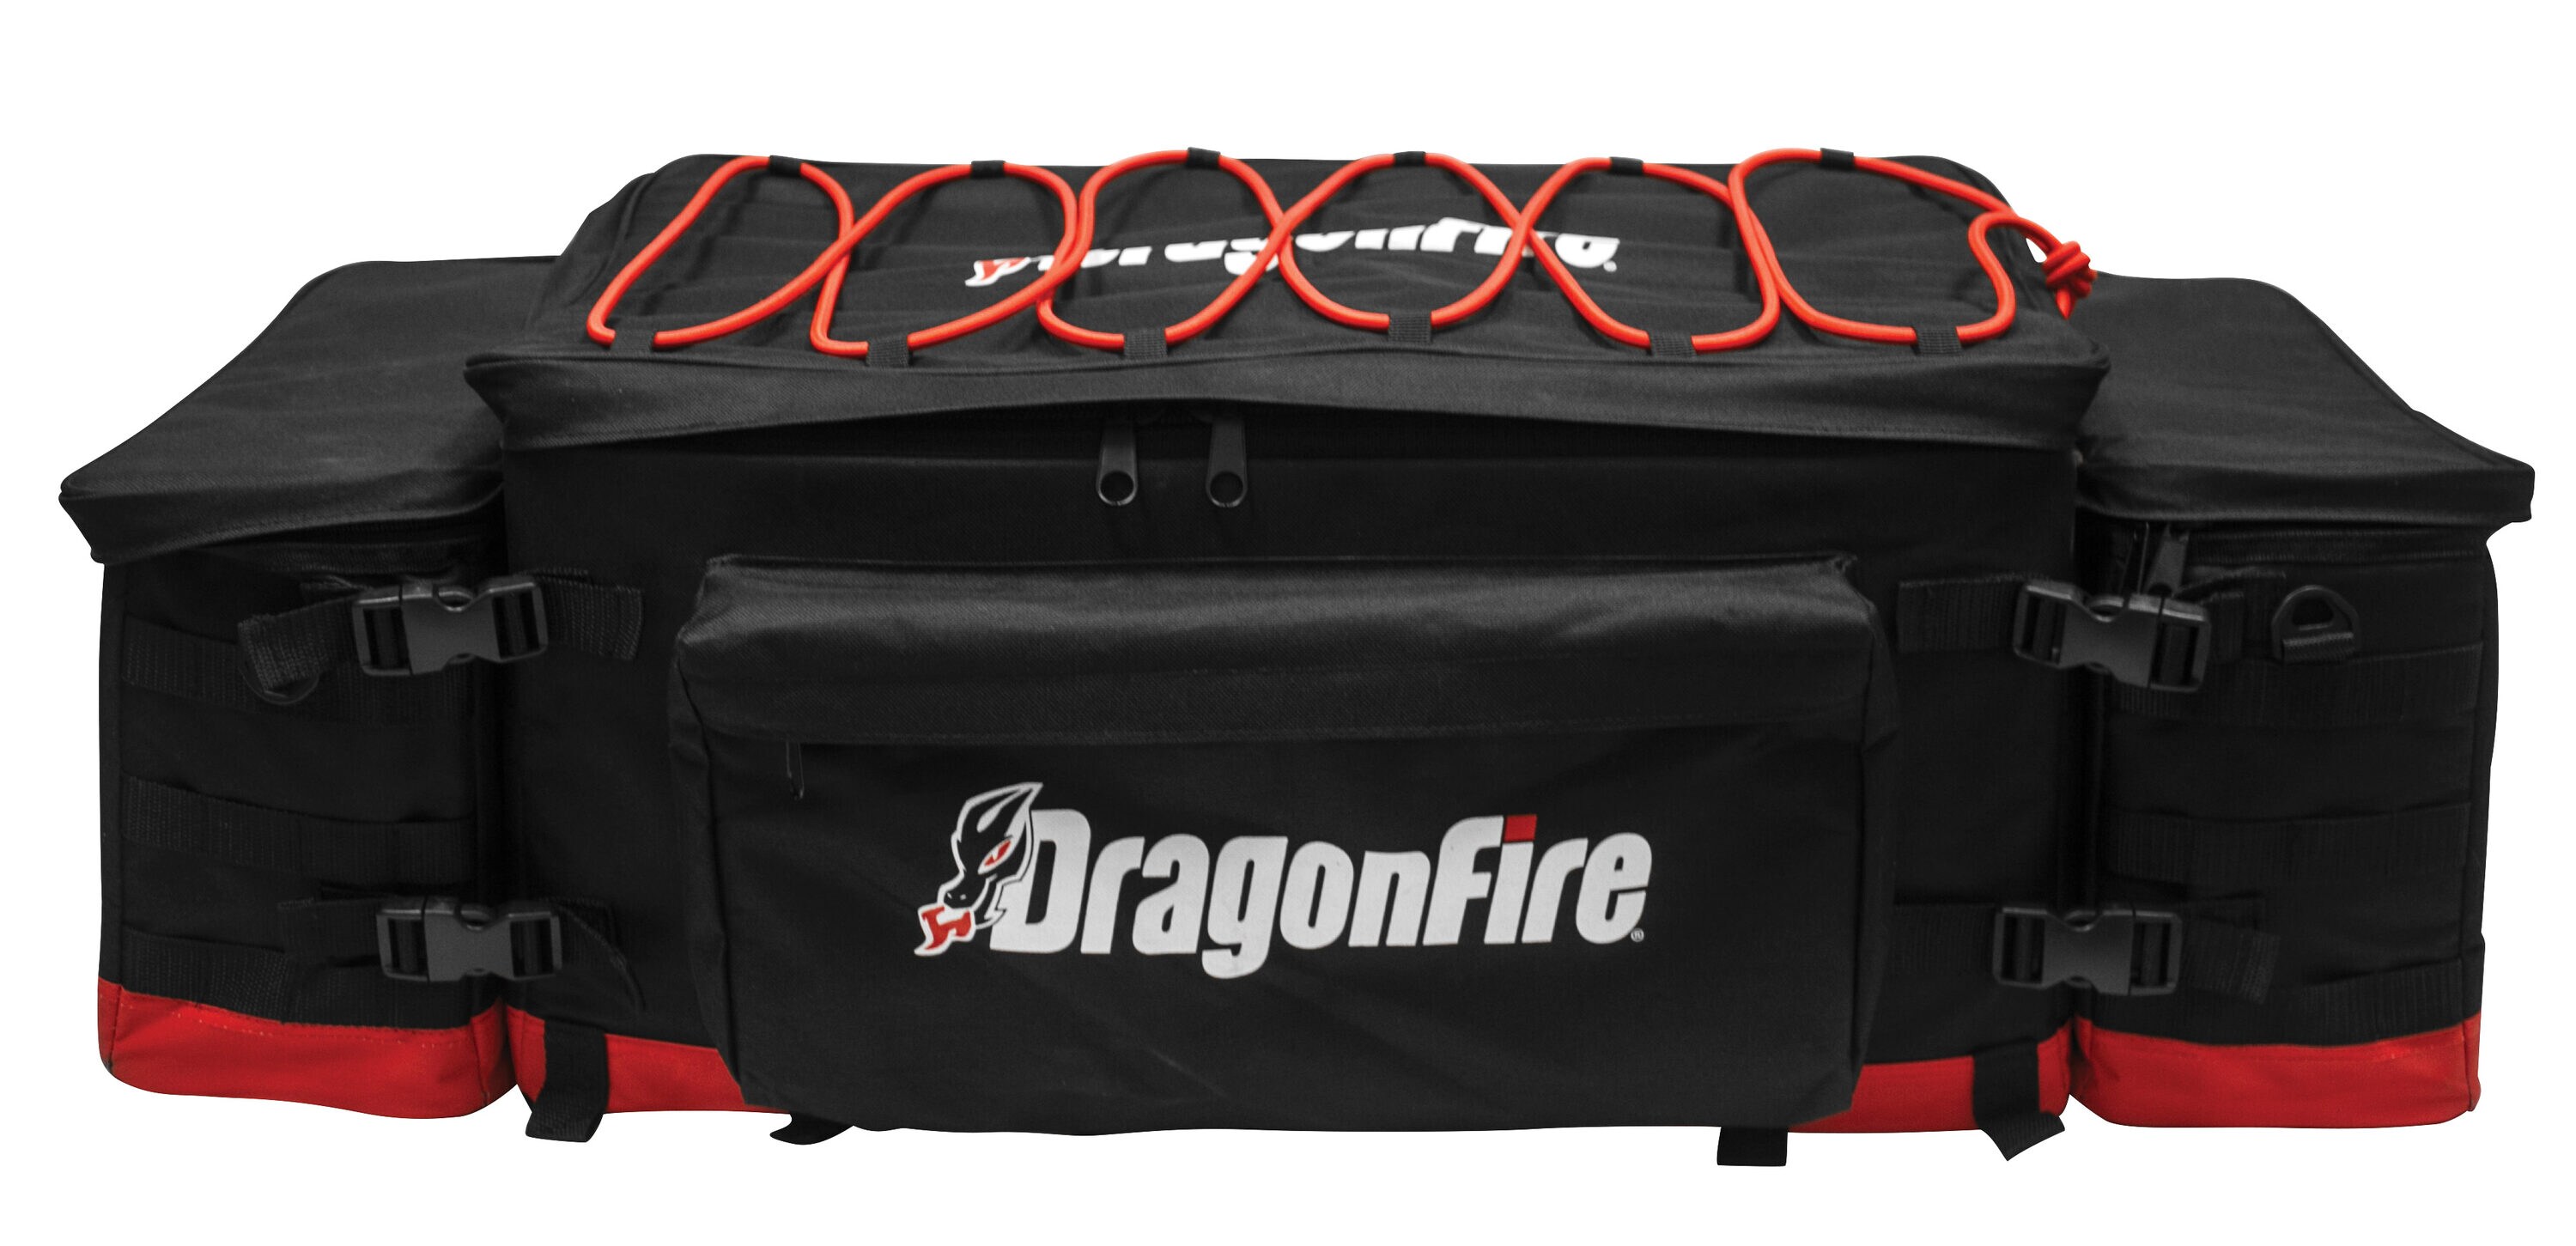 DragonFire Soft Enclosure, Heavy-Duty Zippers and Mounting Straps, ZigZag  Shock Cord for More Storage on Top in the Recreational Vehicle Accessories  department at